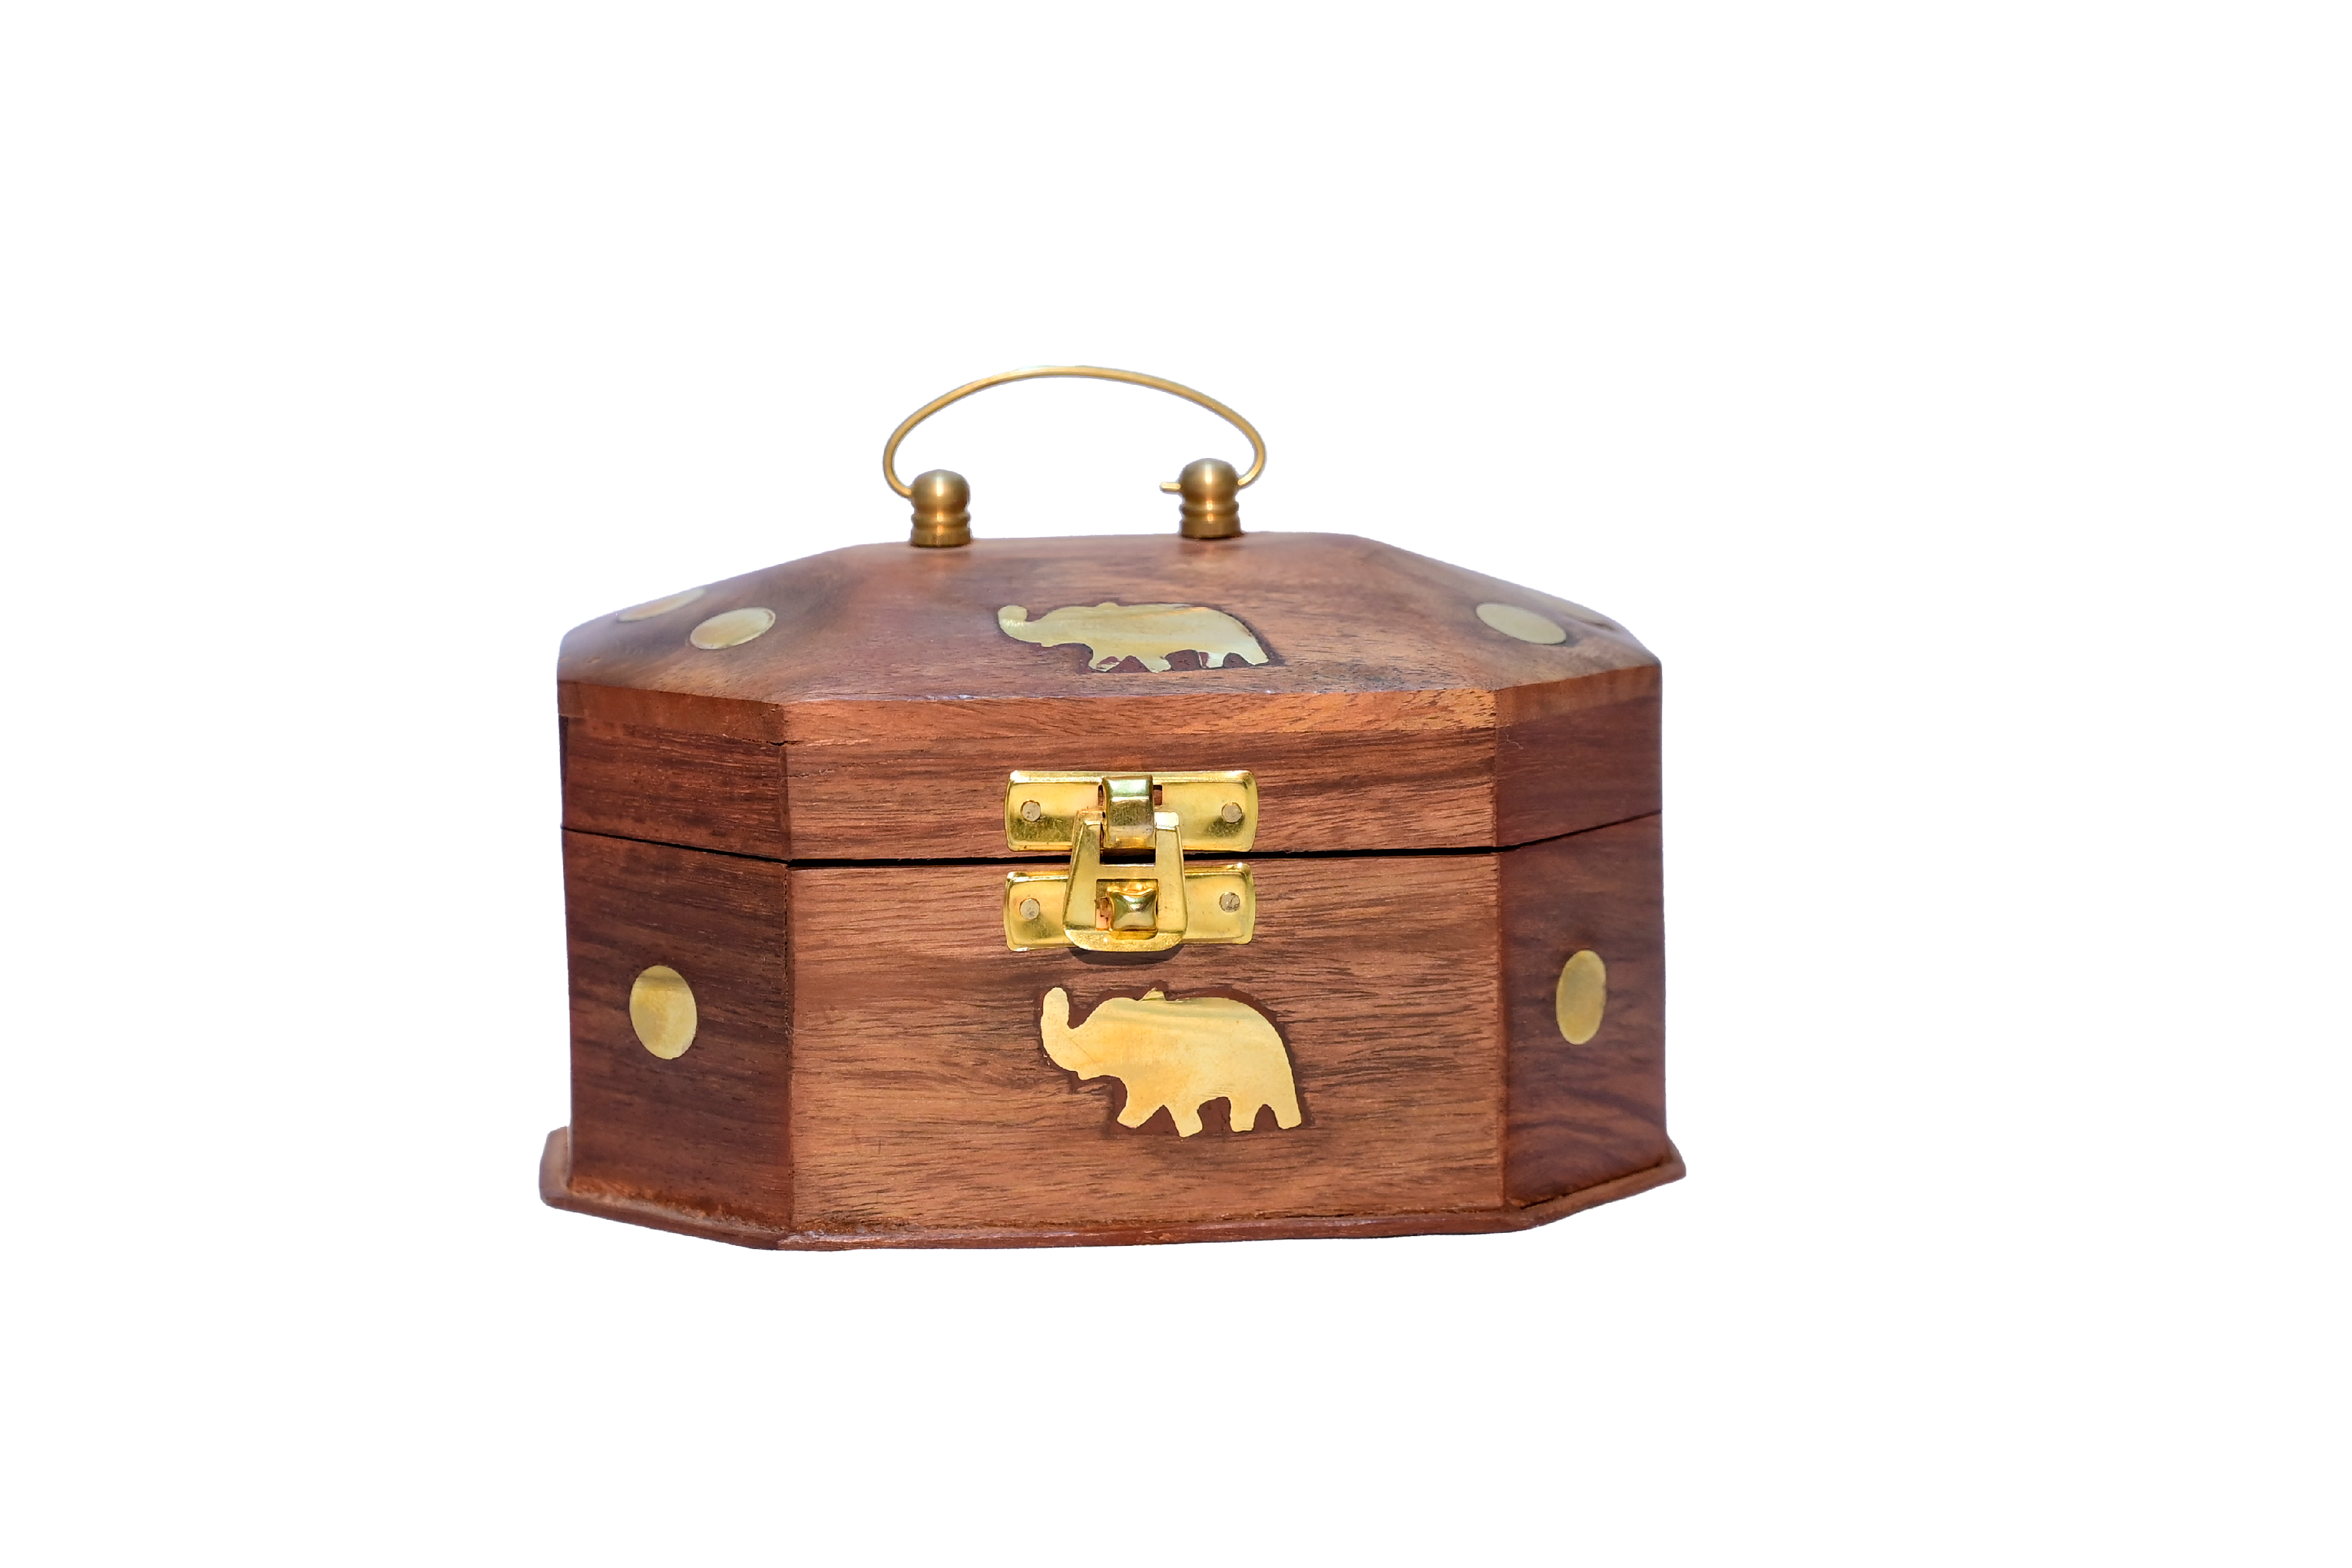 Vintage Wooden Jewellery Box PNG